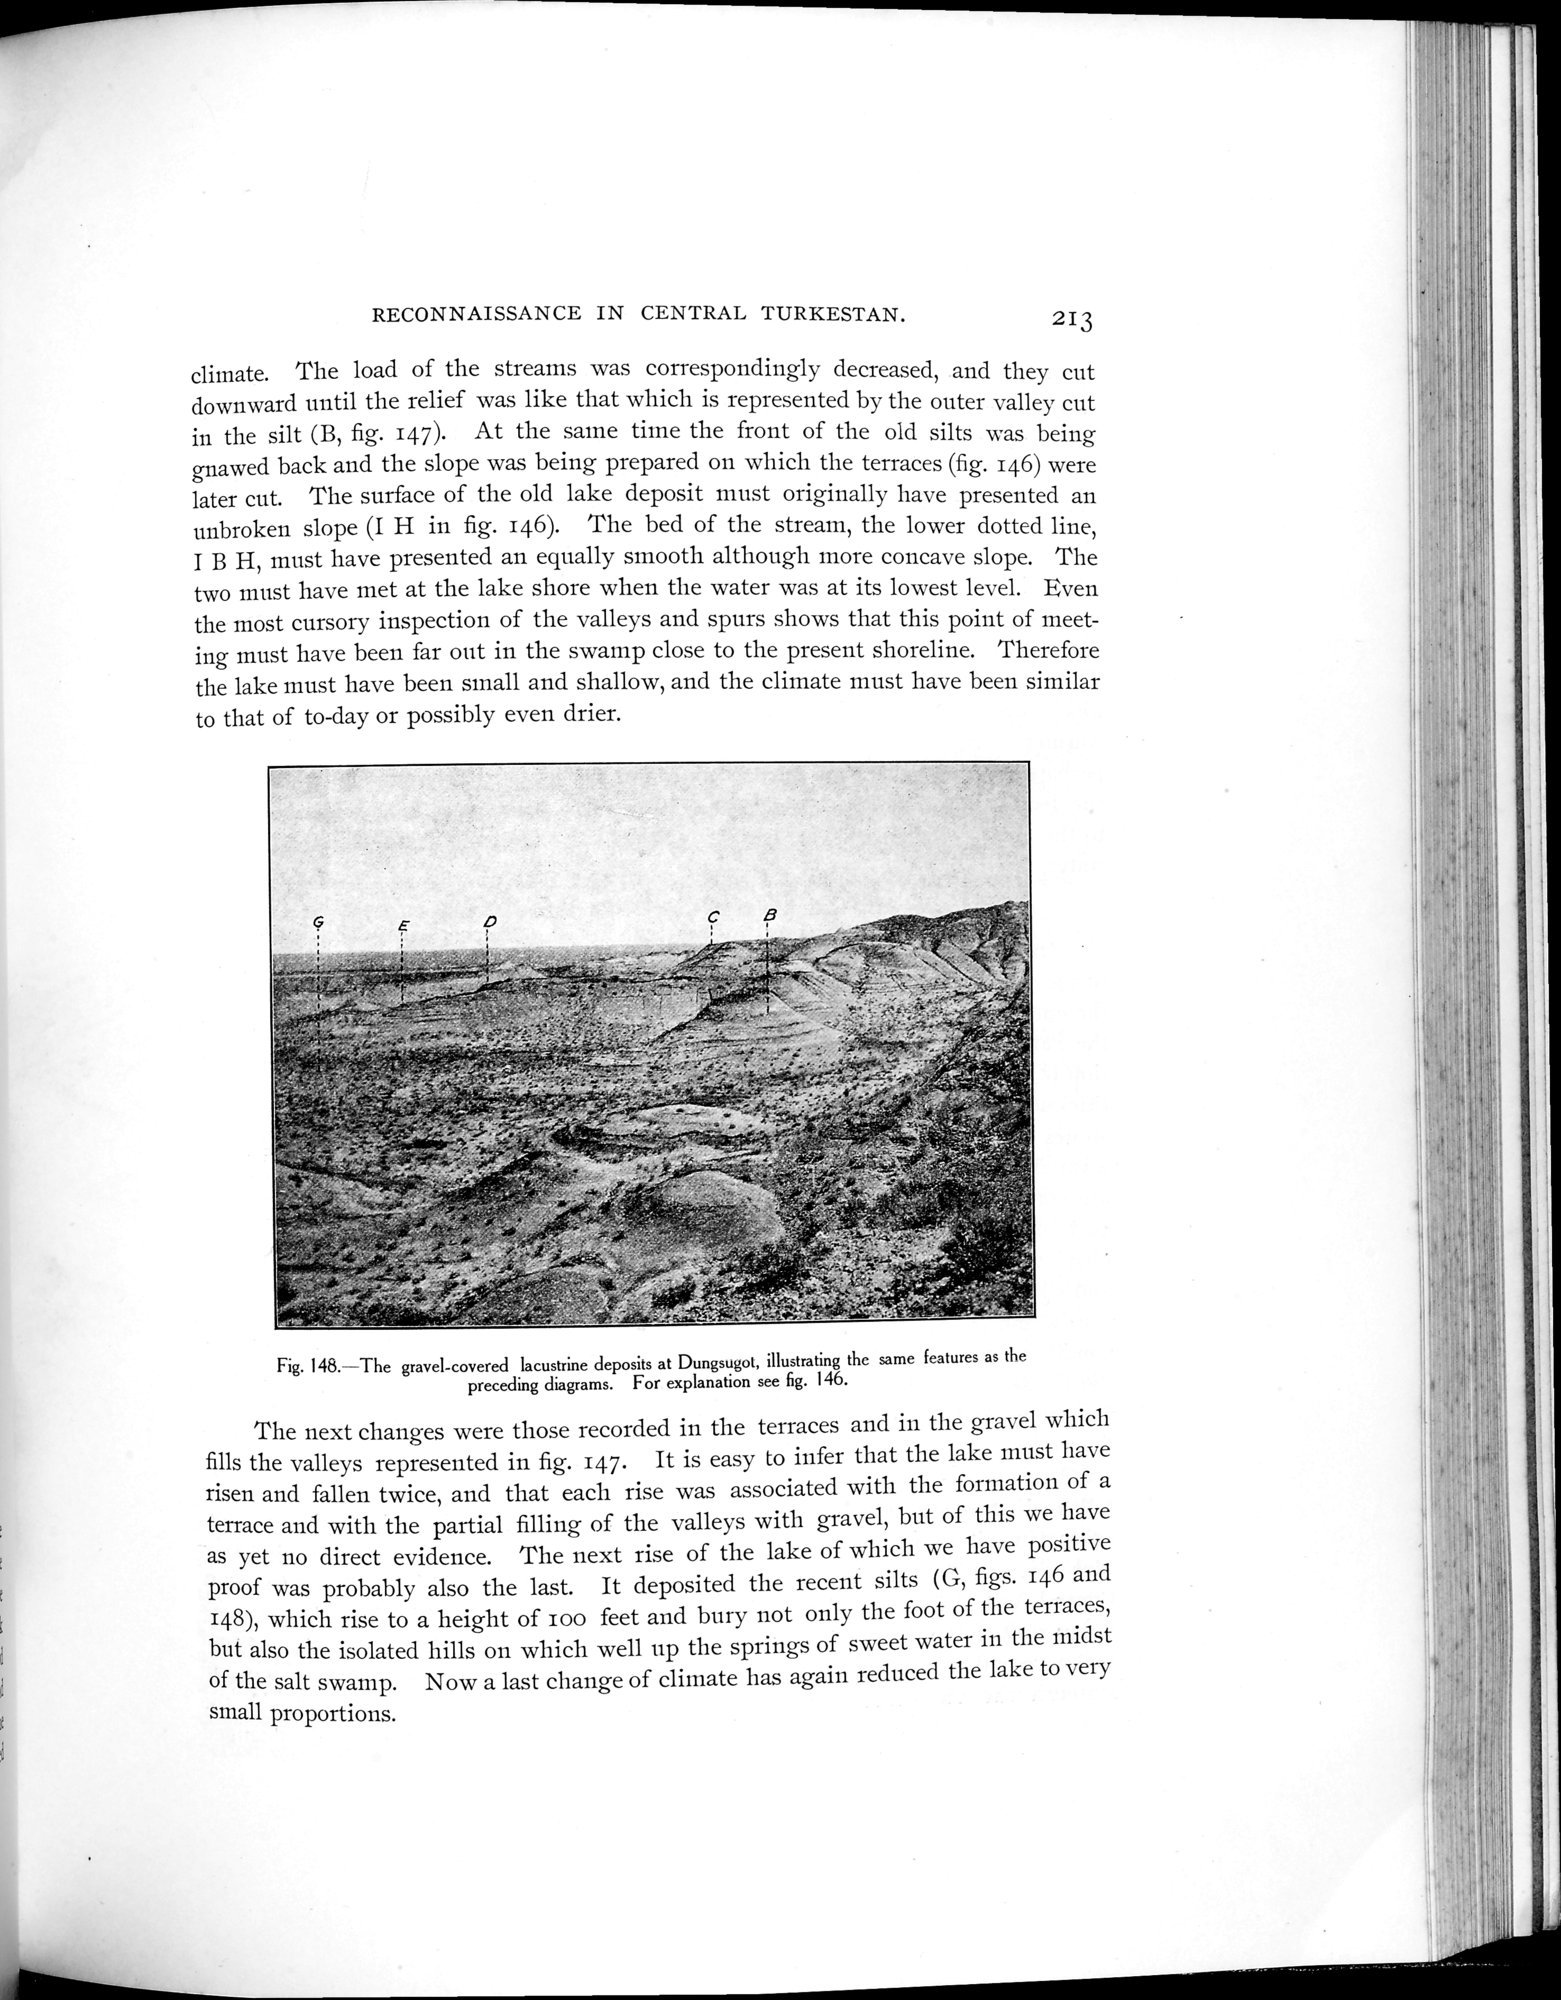 Explorations in Turkestan 1903 : vol.1 / Page 243 (Grayscale High Resolution Image)